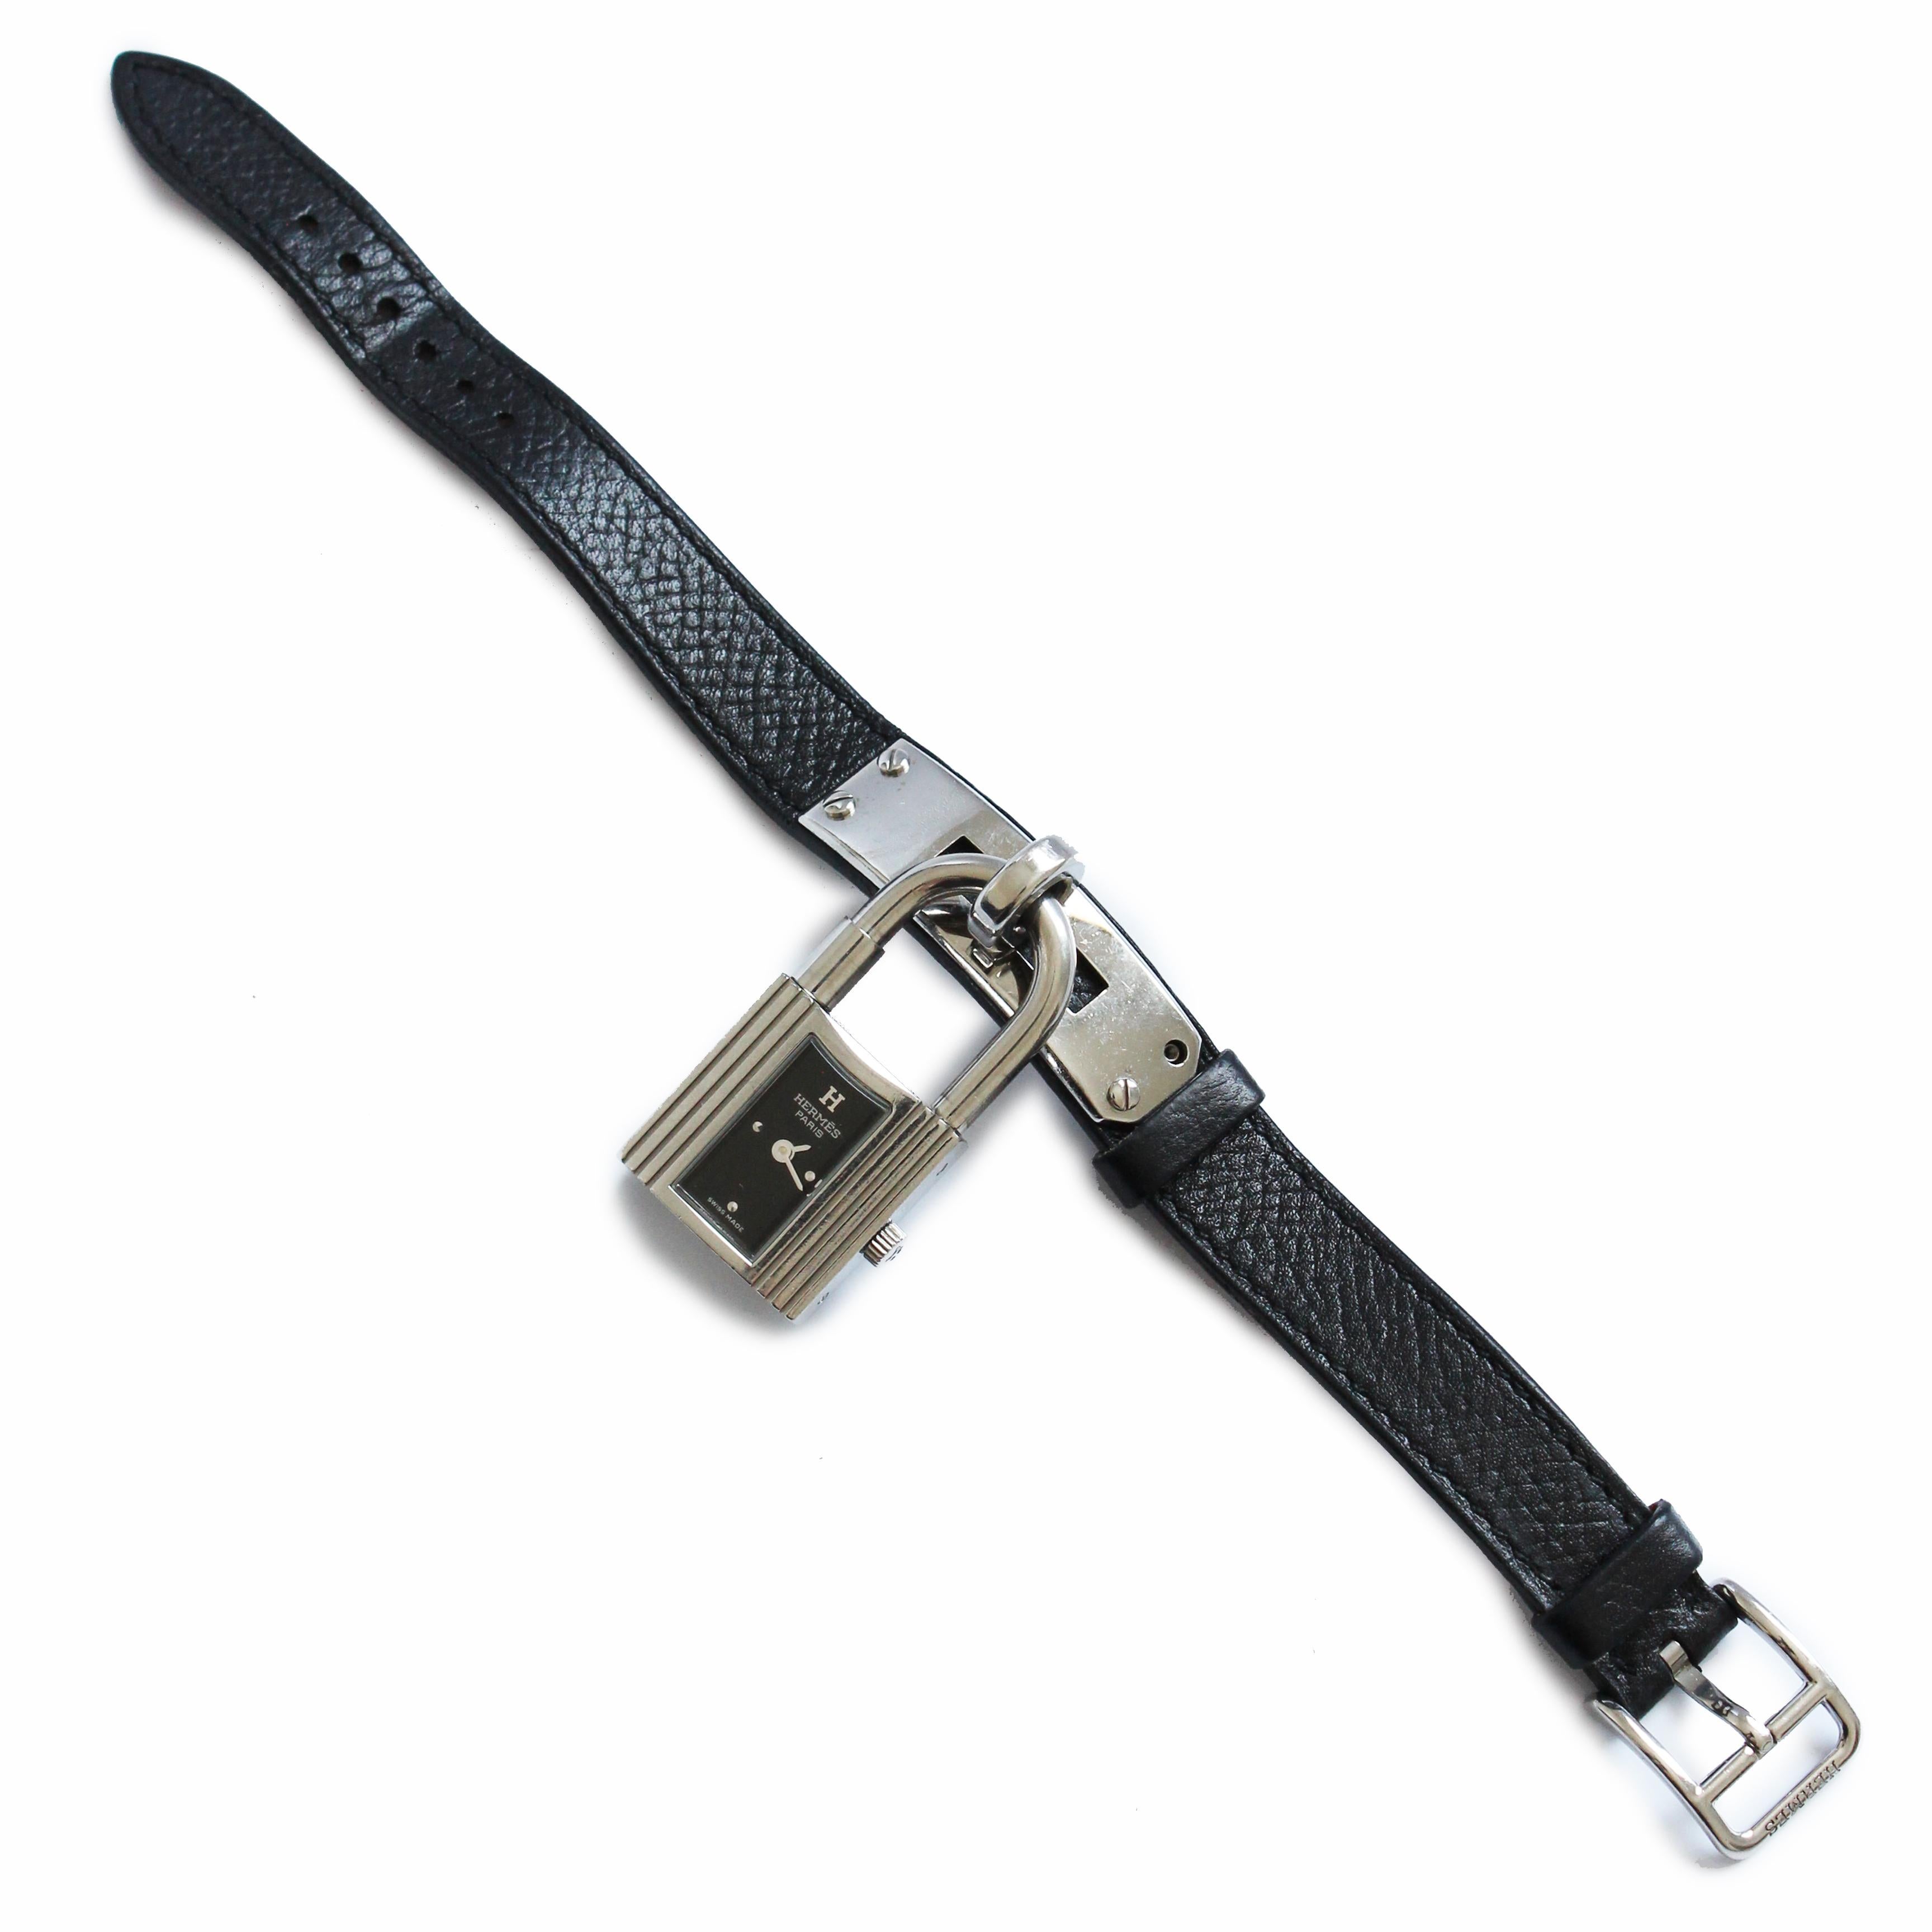 Authentic, preowned, vintage Kelly Cadena Lock Charm Watch in silver metal with black Epsom Calfskin leather, made in 2004.  The strap is stamped H in a square (2004 production); the watch has a black face with silver 1/4 hour markers. The Cadena